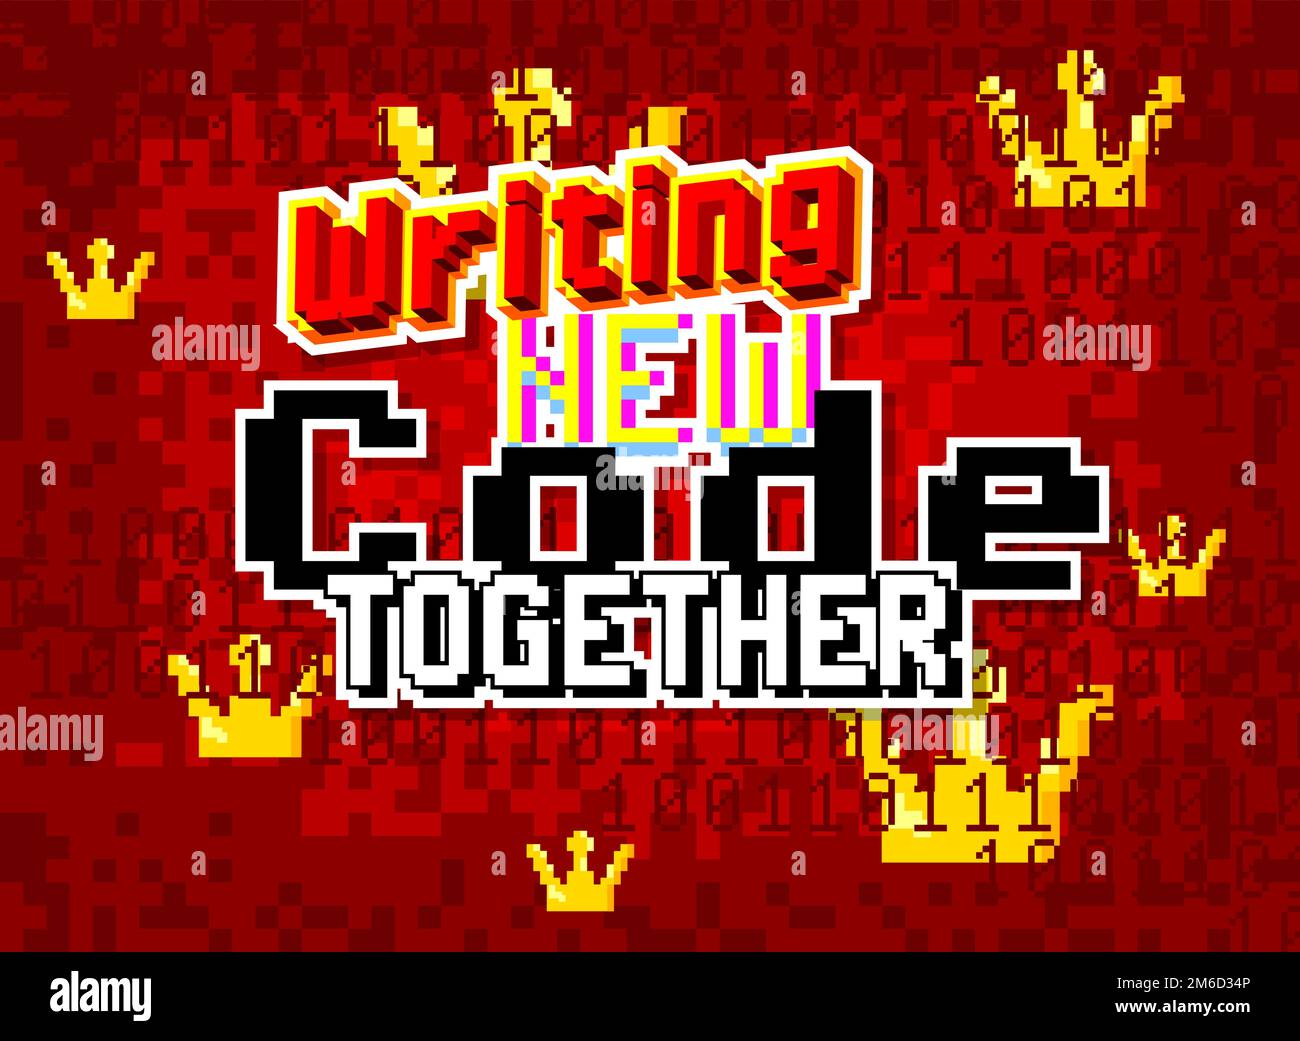 Writing New Code Together. Pixelated text with geometric graphic background. Vector cartoon illustration. Stock Vector